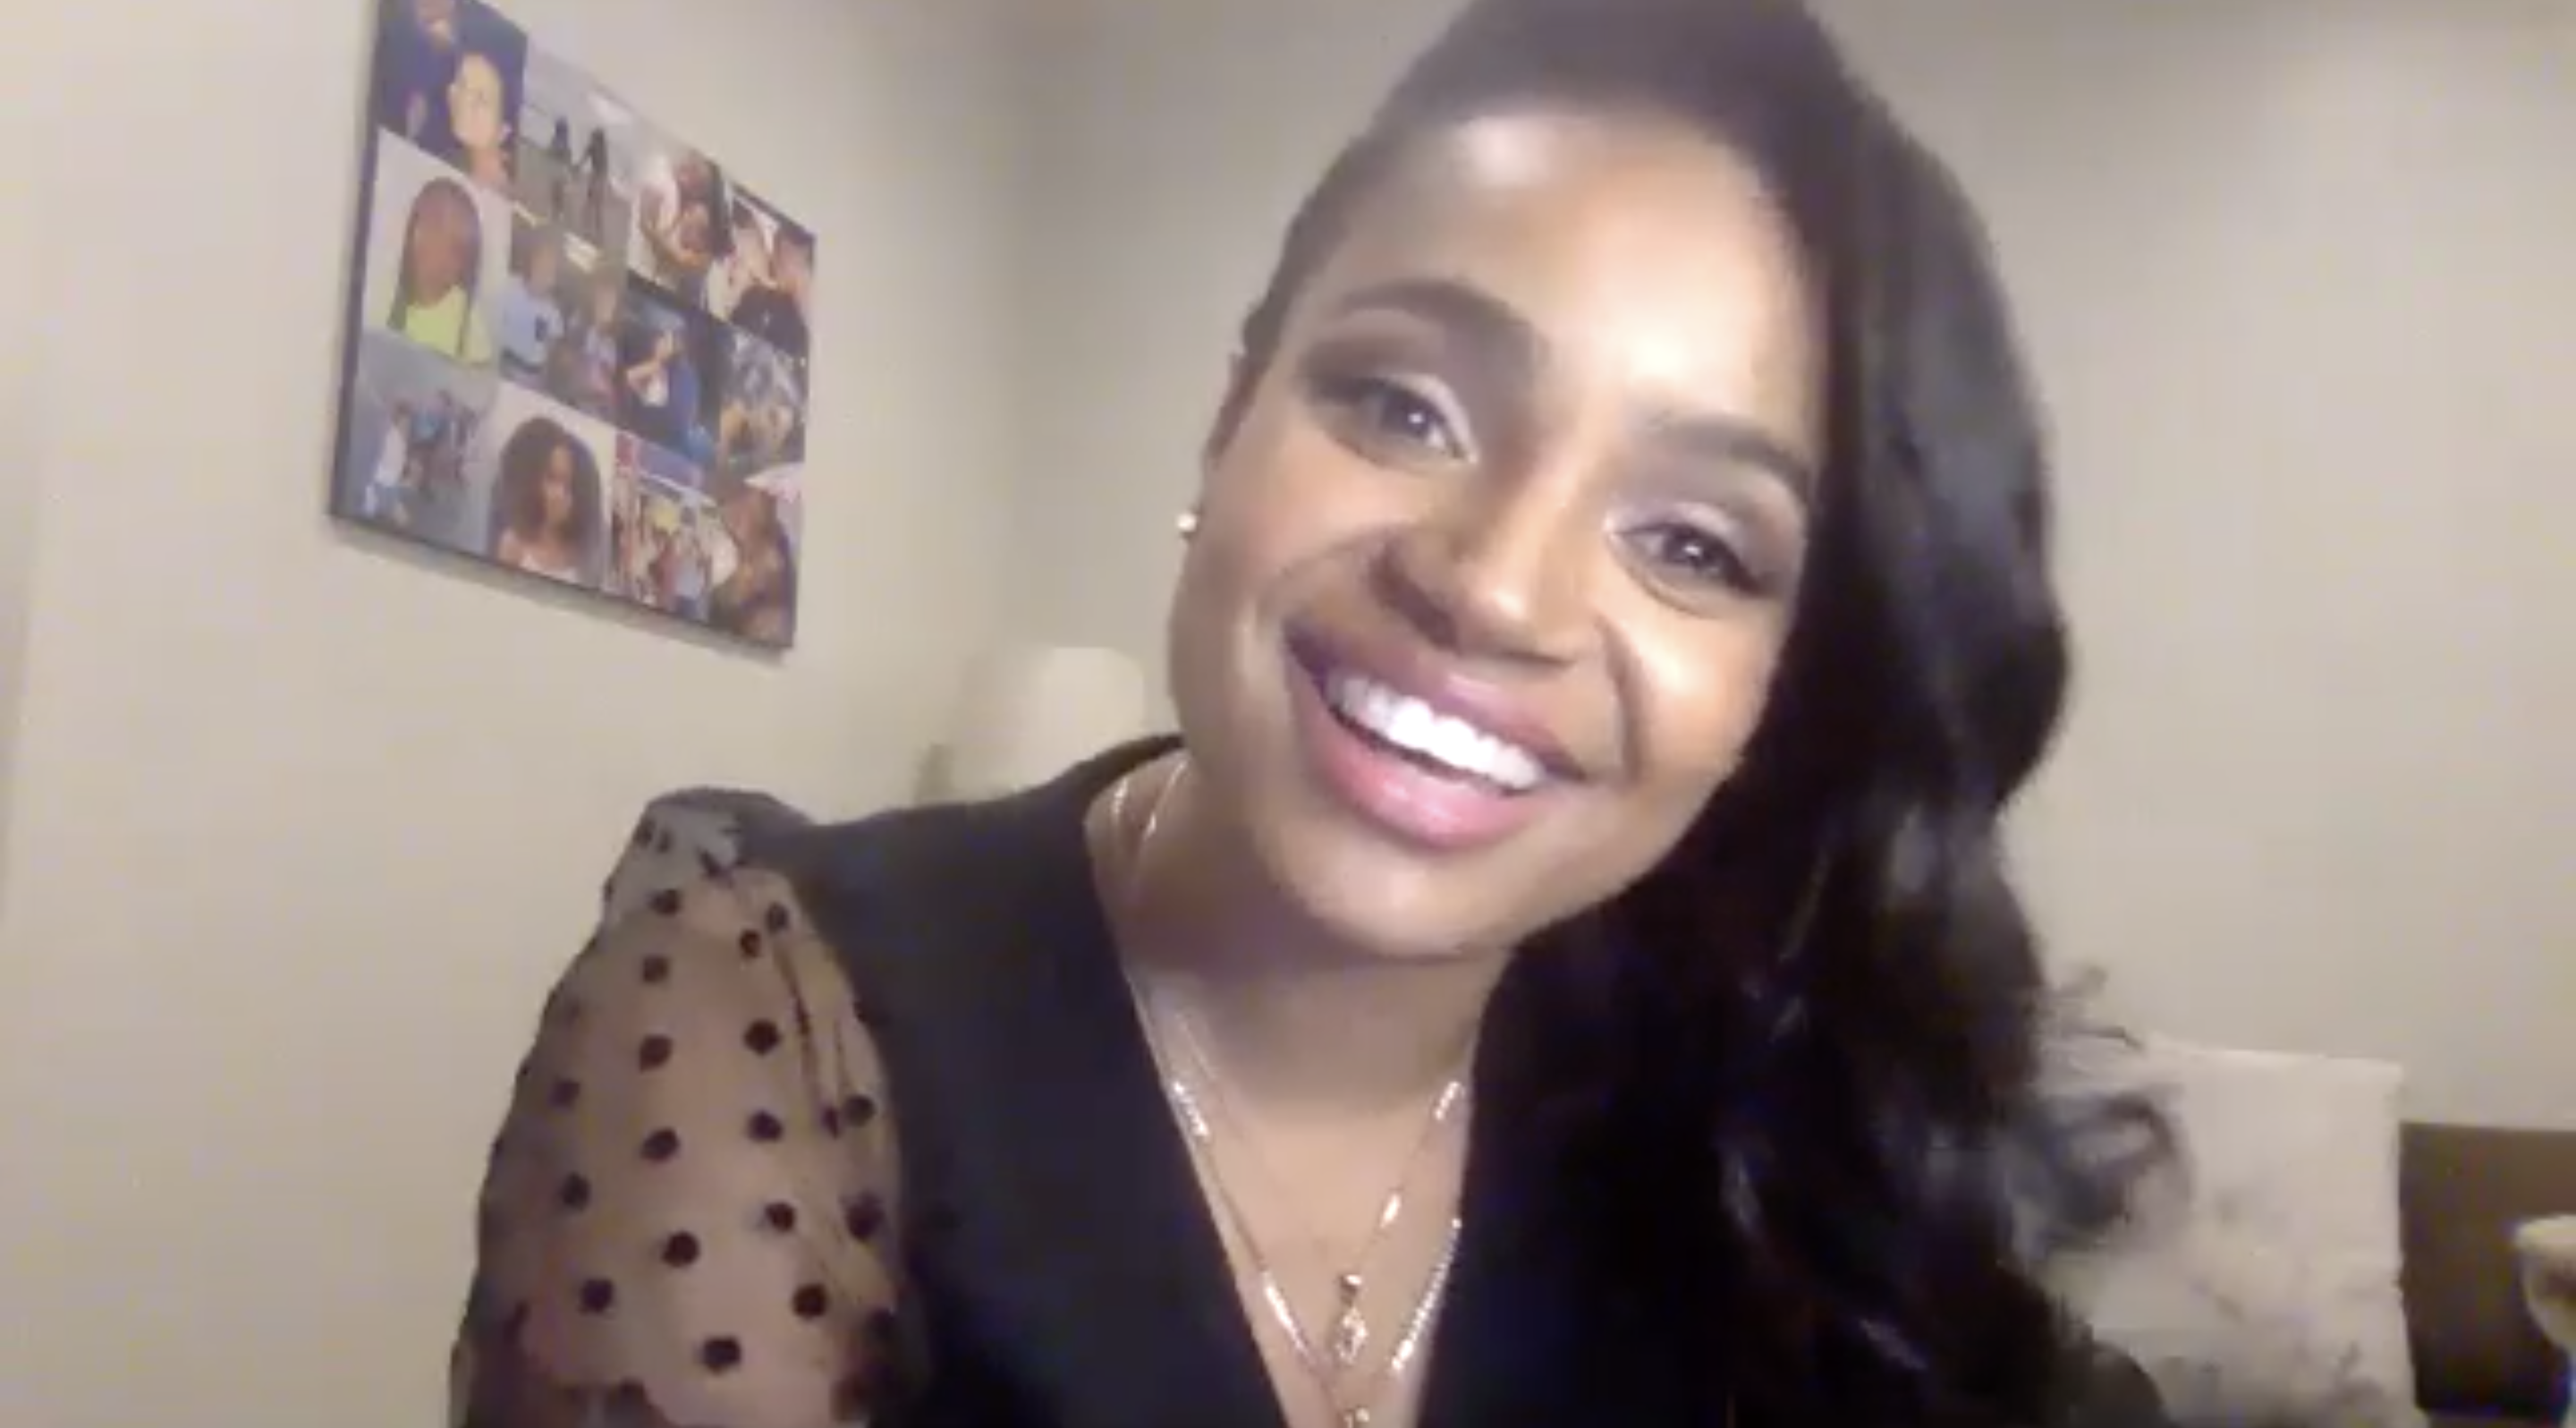 Kyla Pratt smiling with a painting in the background